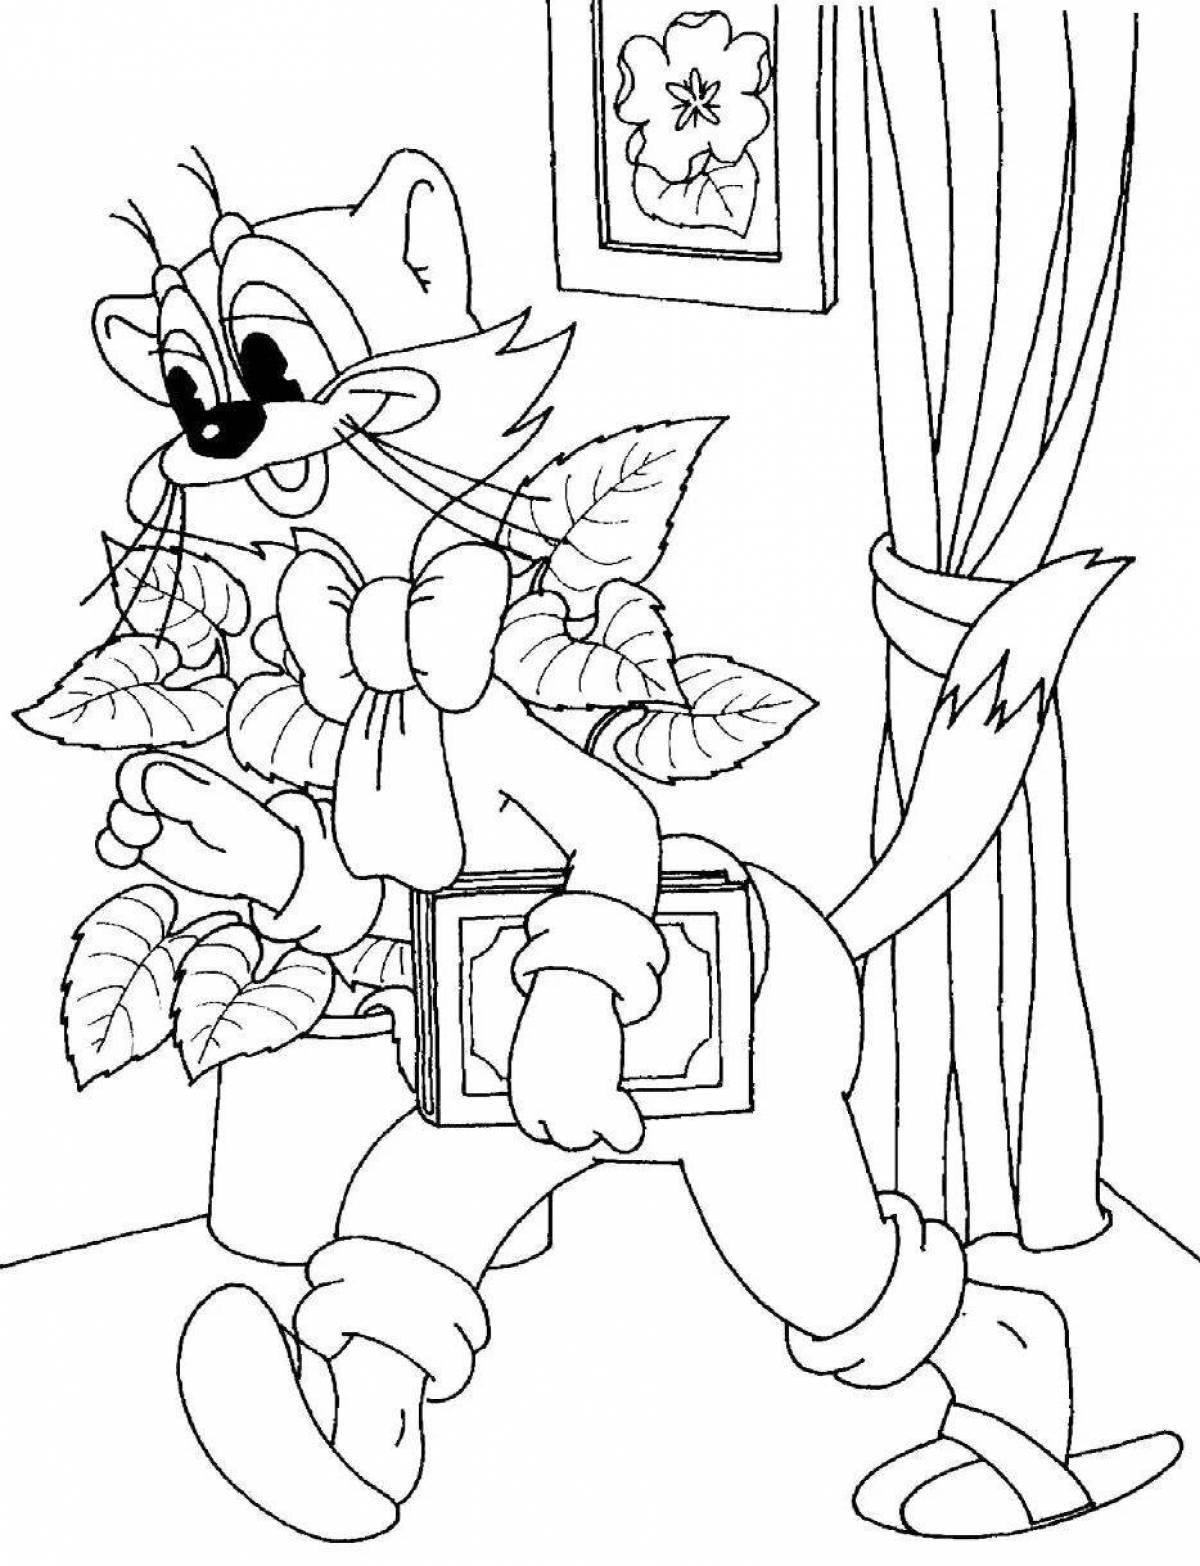 Color explosion leopold coloring page